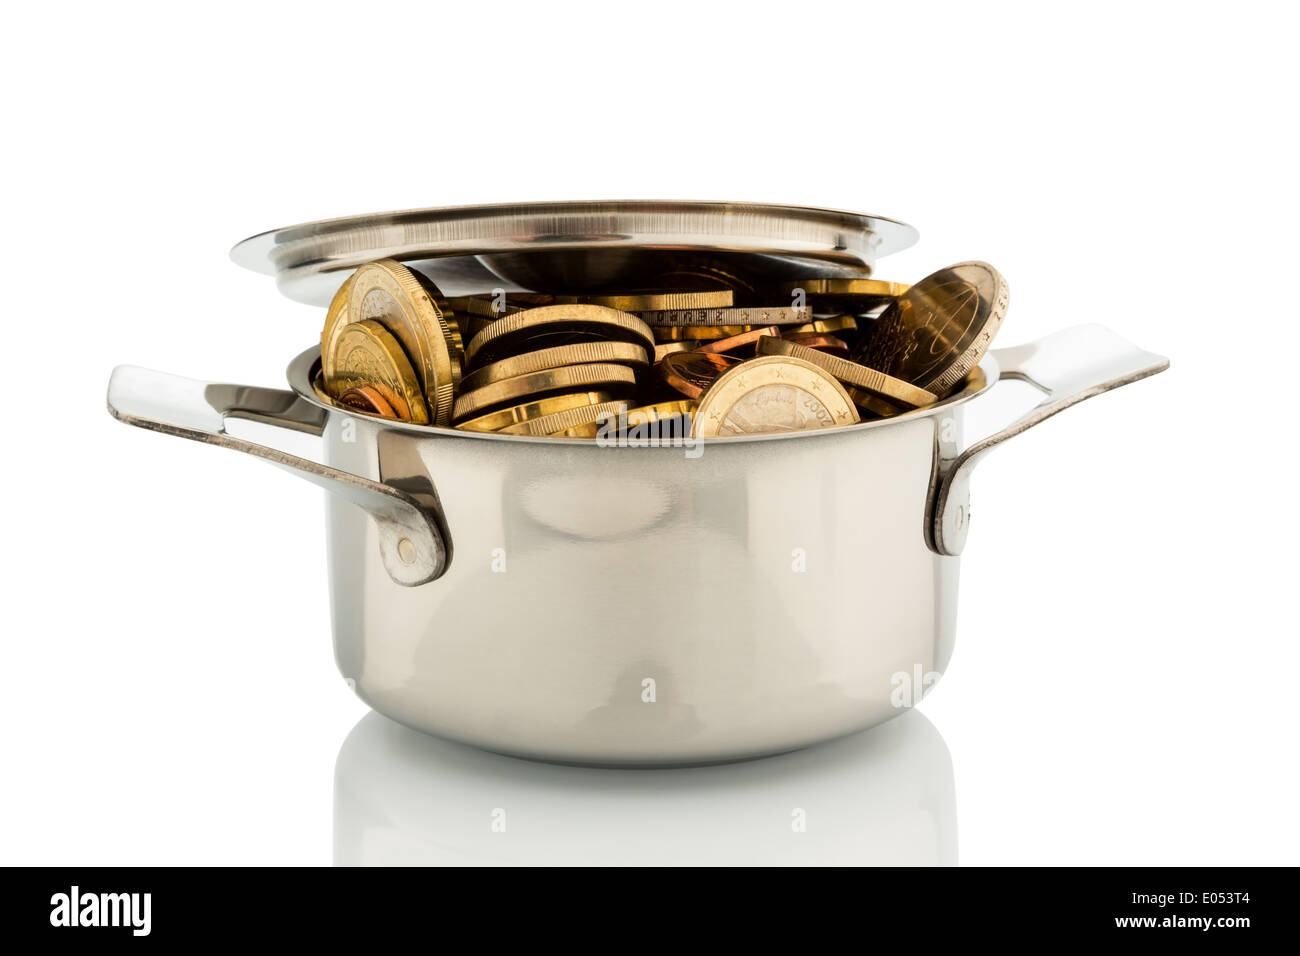 A saucepan is well filled with eurocoins, symbolic photo for conveyor money Stock Photo